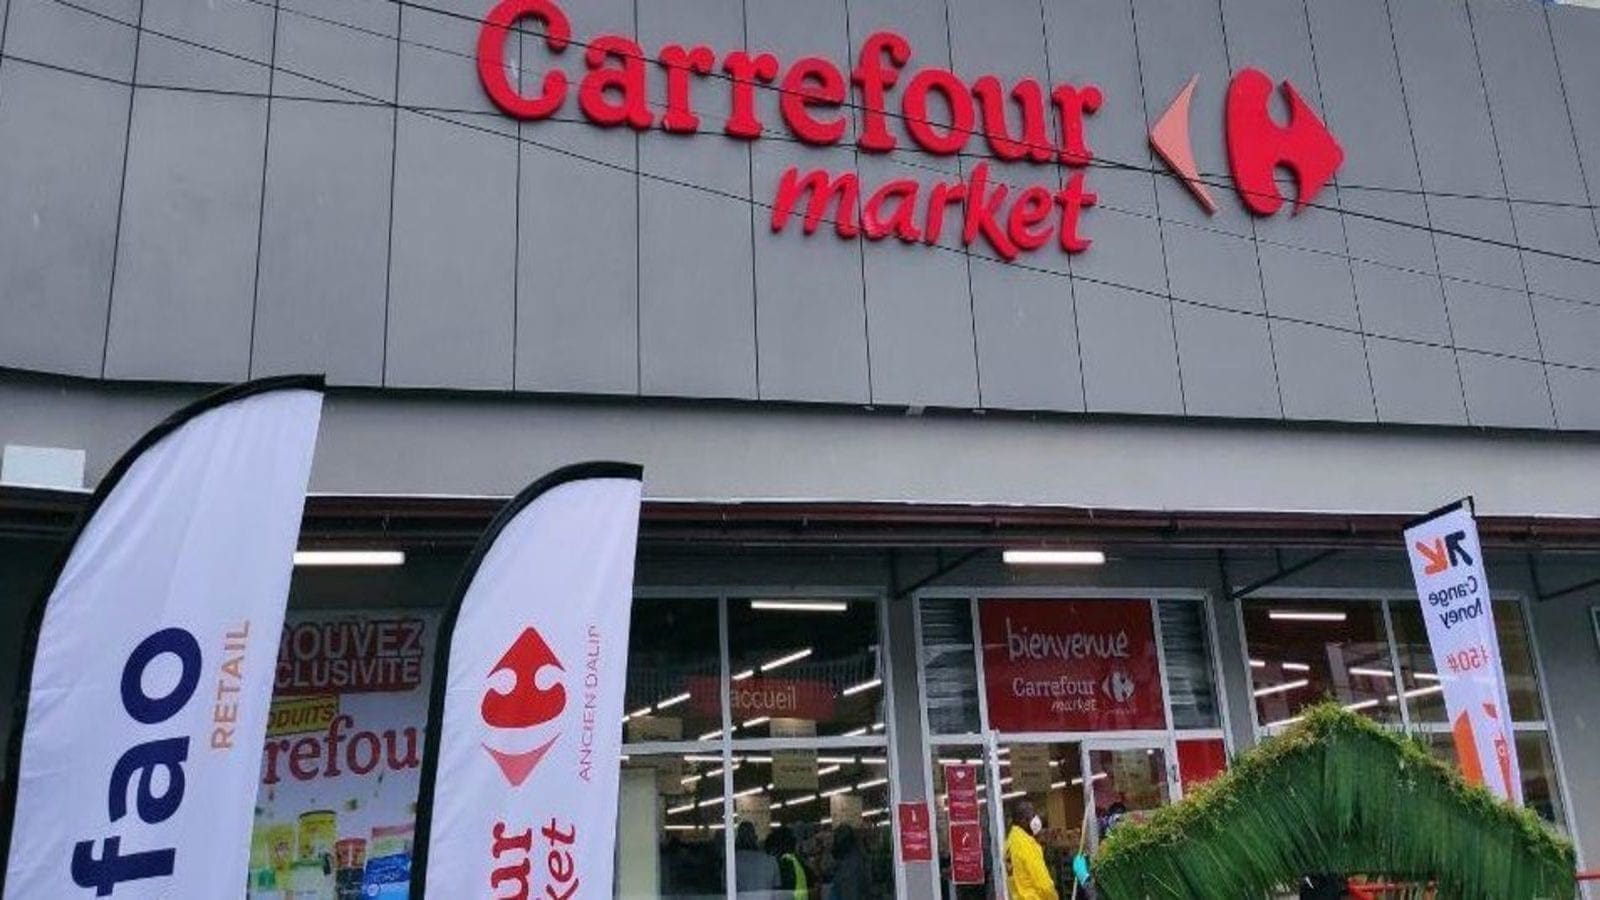 Carrefour set to open fourth outlet in Cameroon in expansion spree